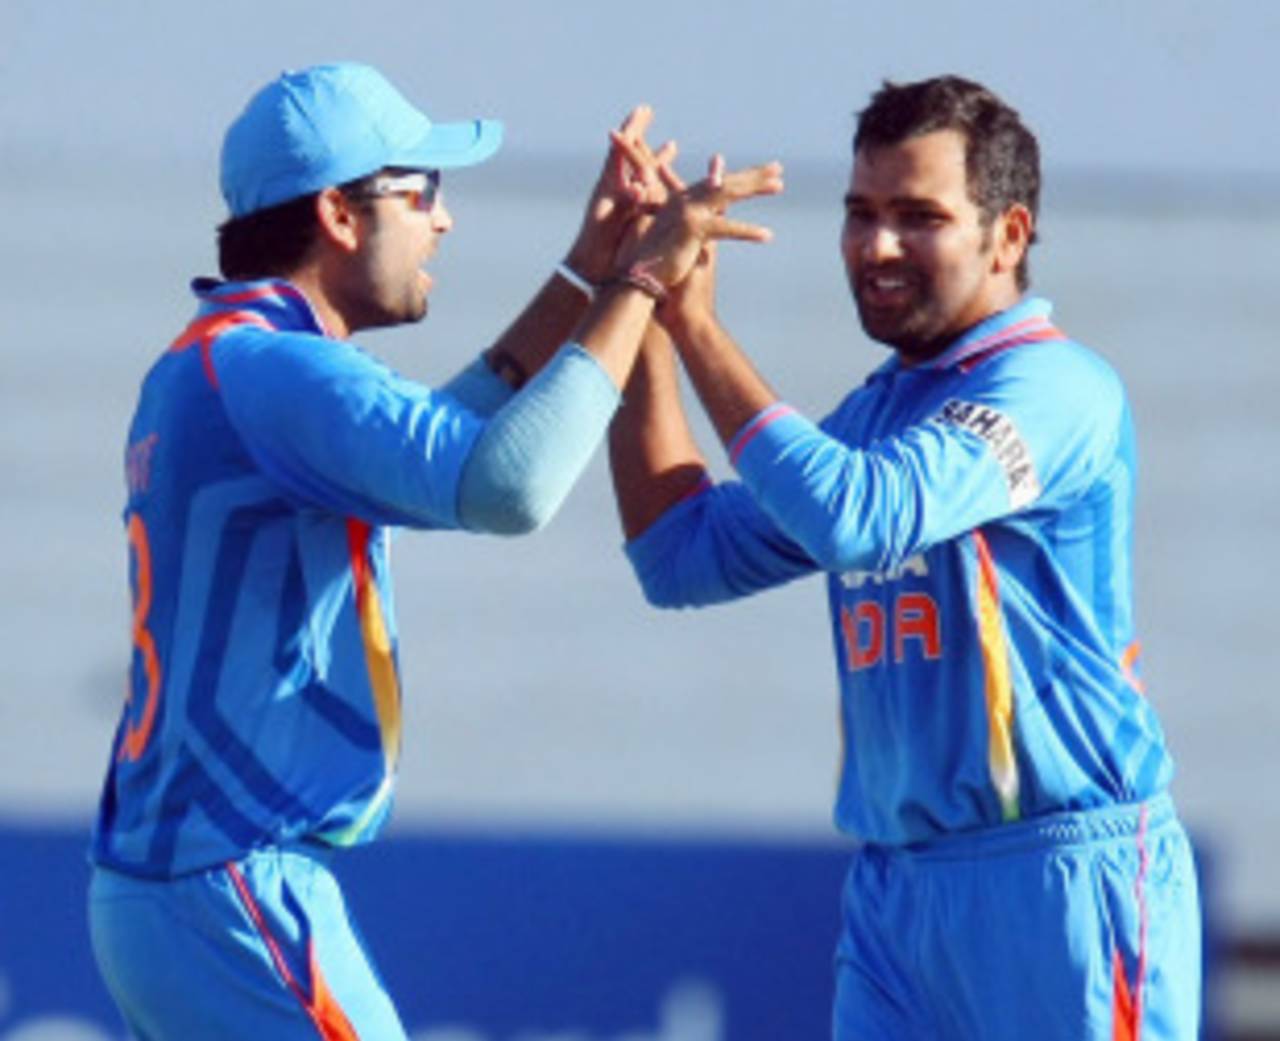 Rohit Sharma and M Vijay celebrate the wicket of AB de Villiers, South Africa v India, 1st ODI, Durban, January 12, 2011